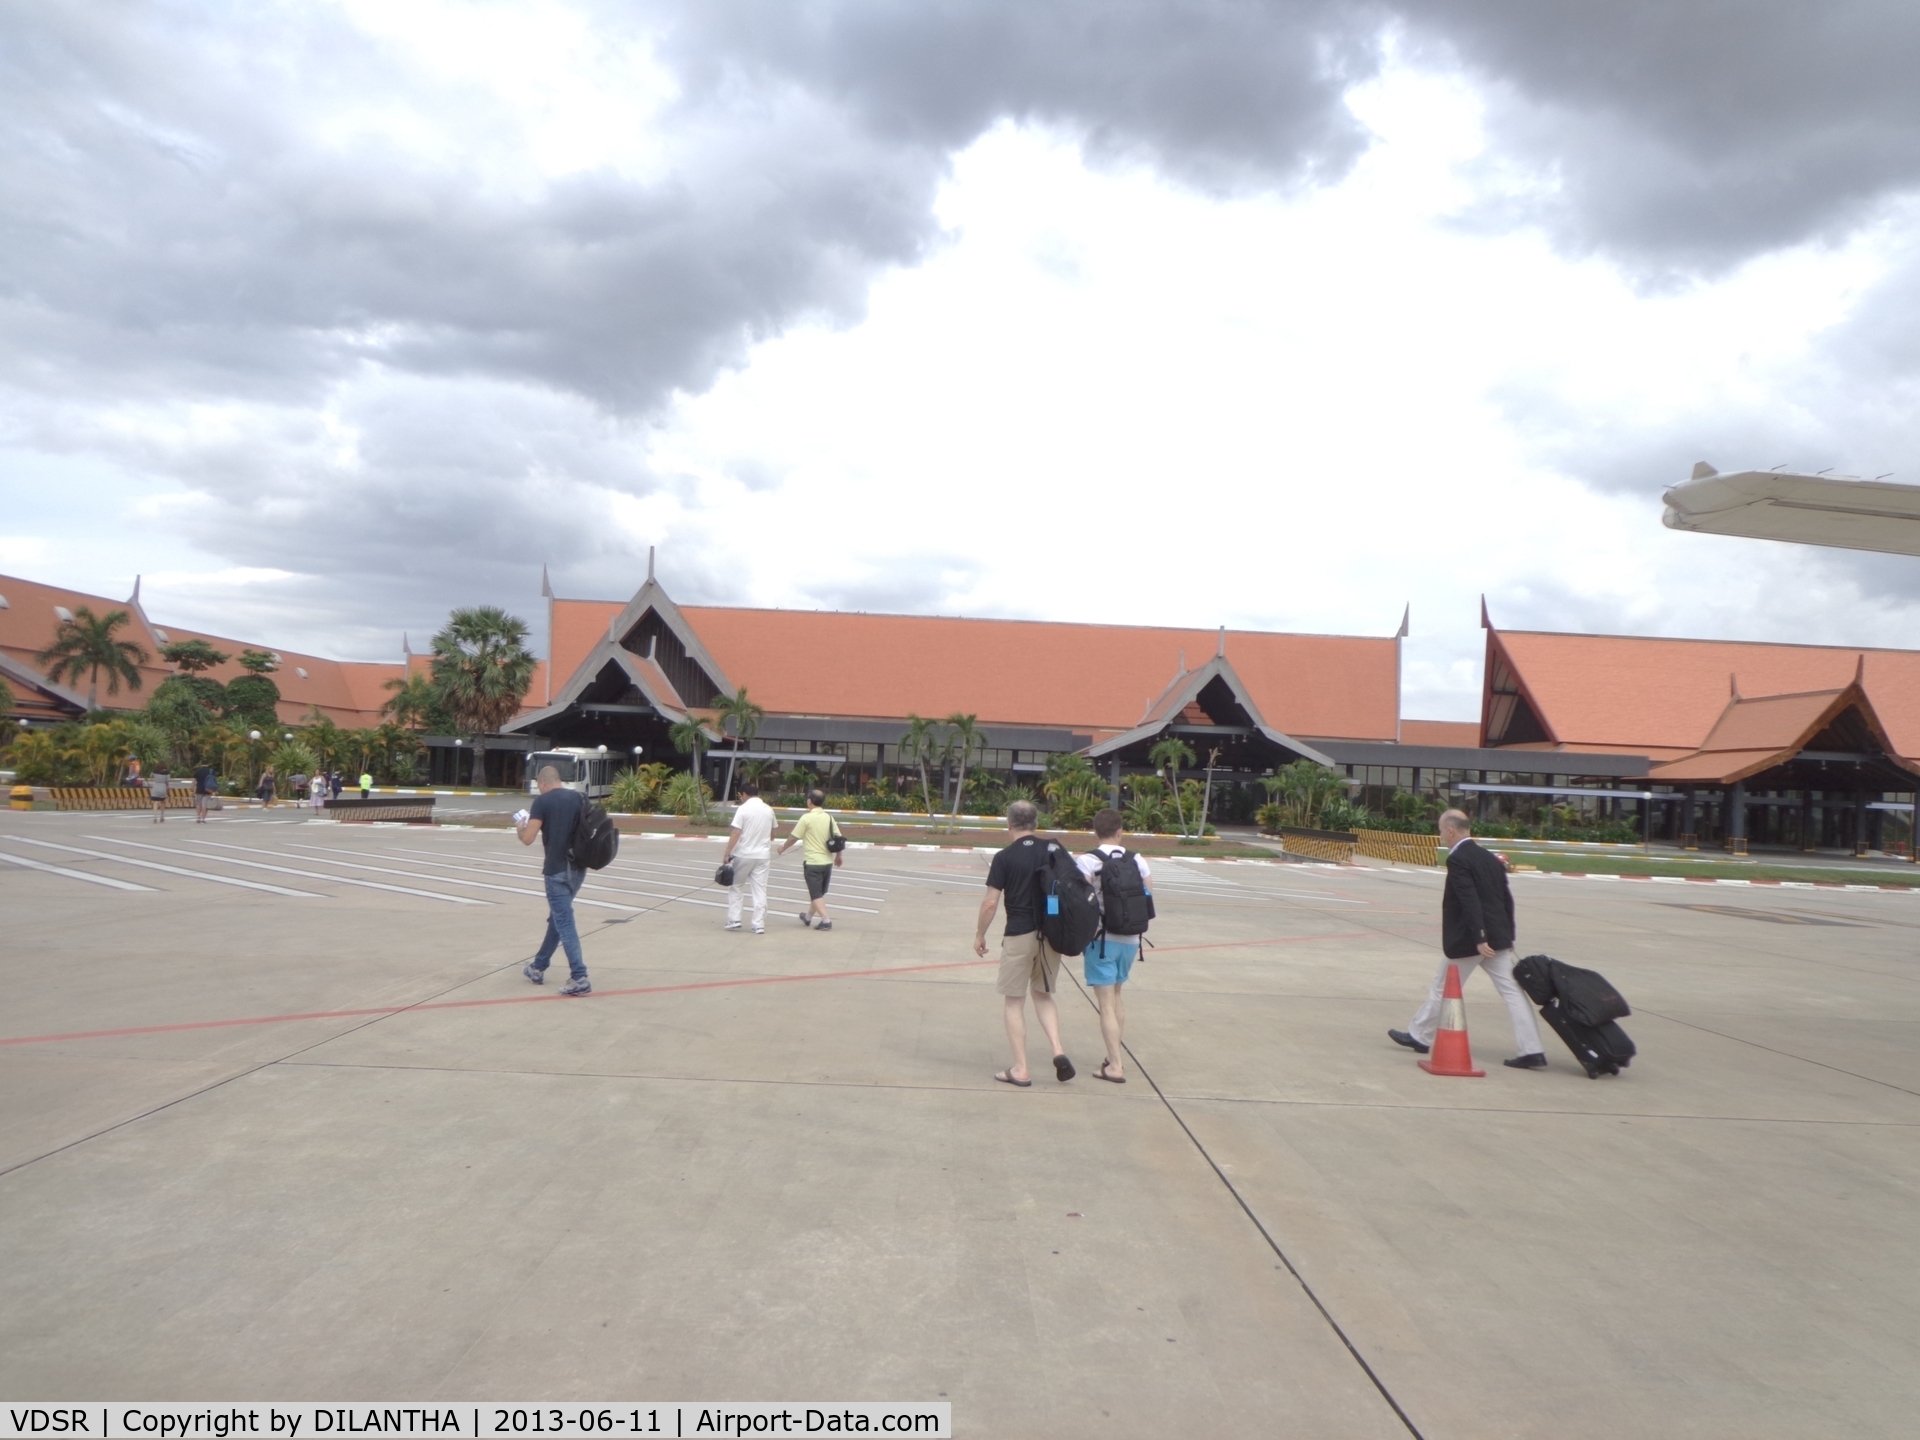 Angkor International Airport, Siem Reap Cambodia (VDSR) - the terminal view from airside.